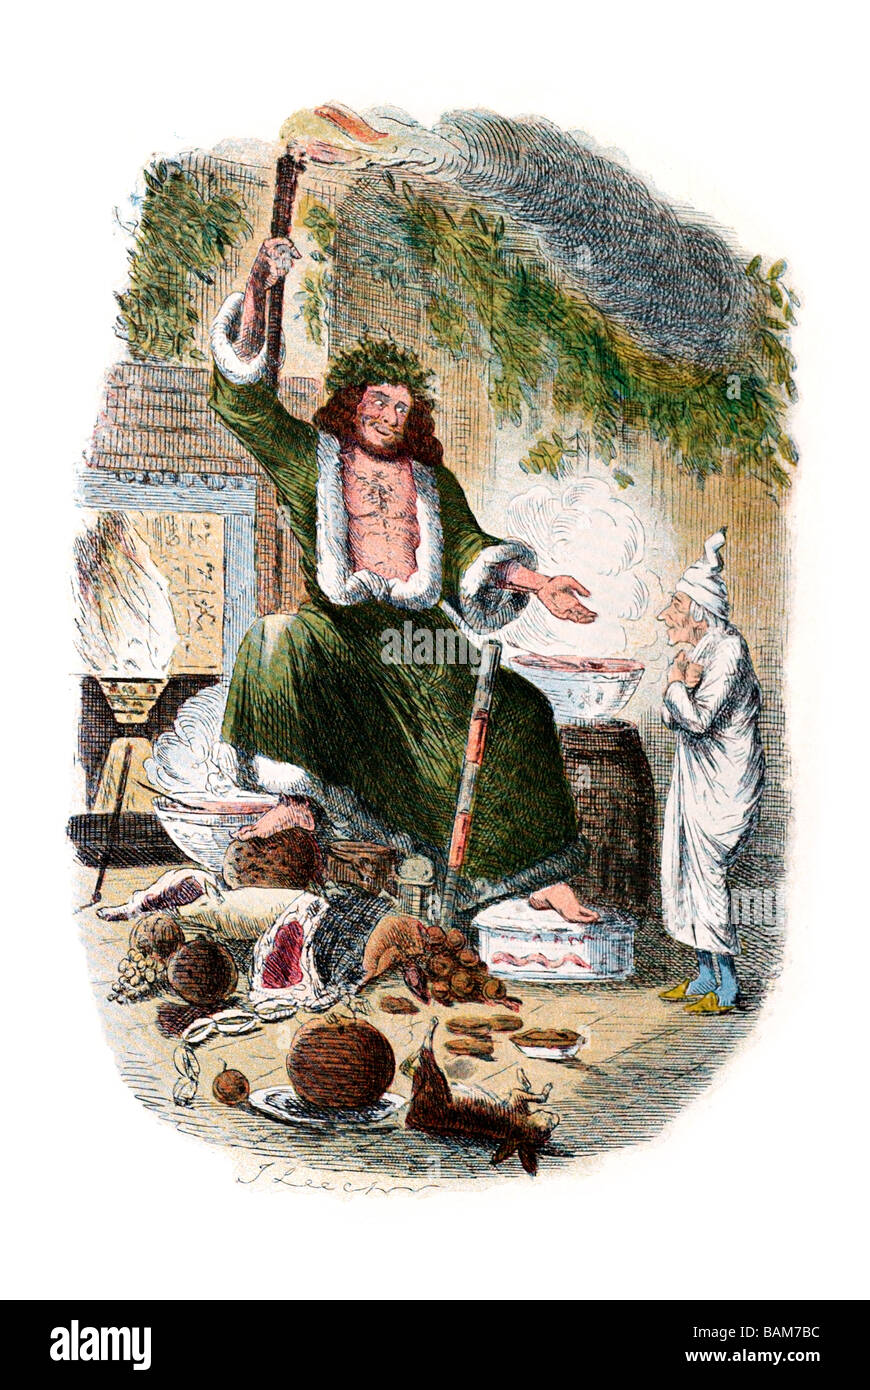 scrooge s third visitor A Christmas Carol in Prose, Being a Ghost Story of Christmas charles dickens Stock Photo